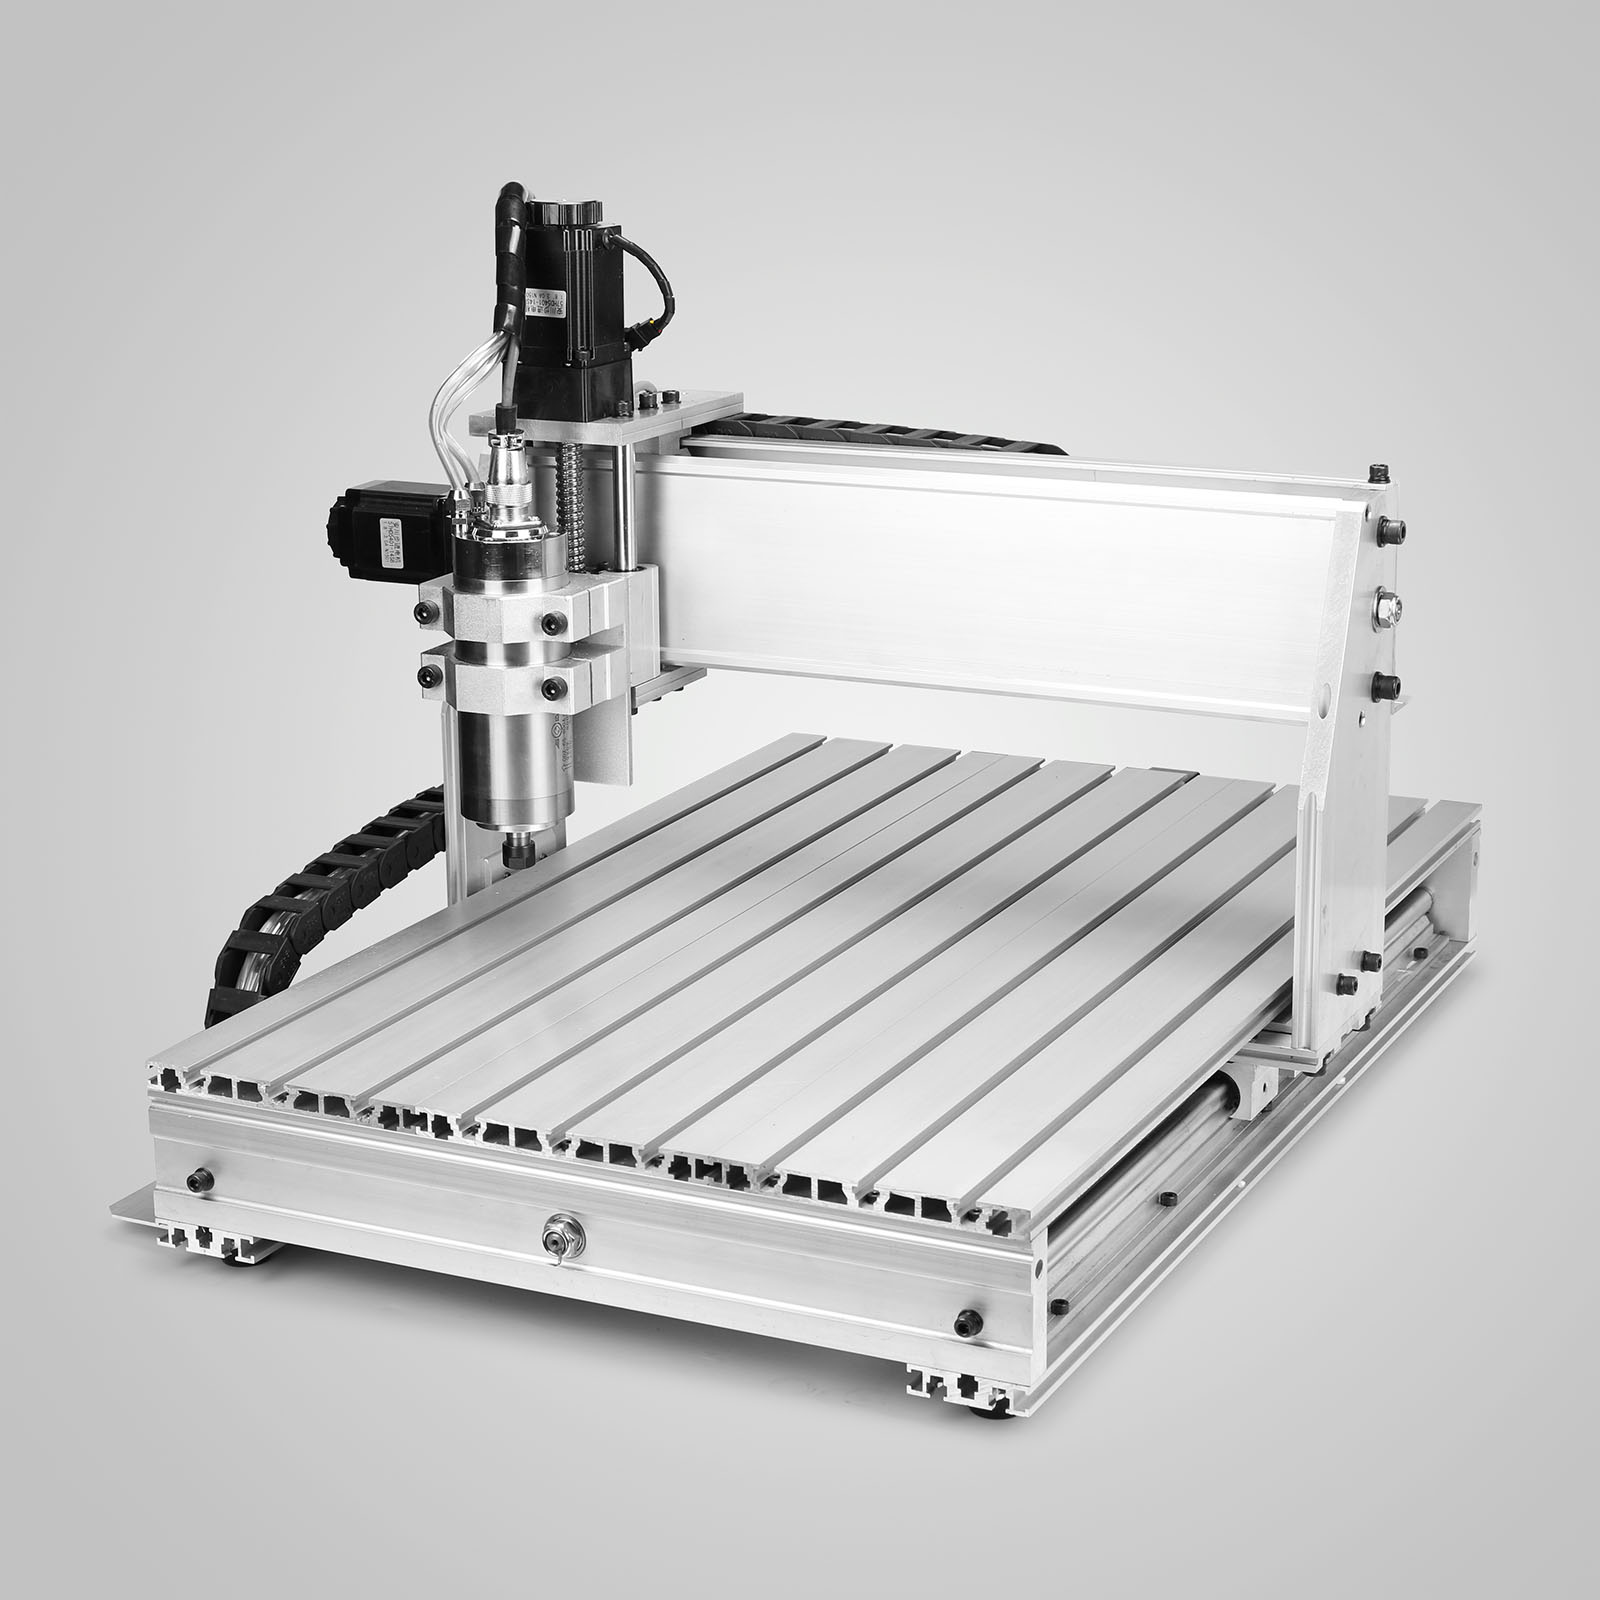 6040 Cnc Router Engraver Engraving Machine 3 Axis Woodworking Drilling Milling Ebay